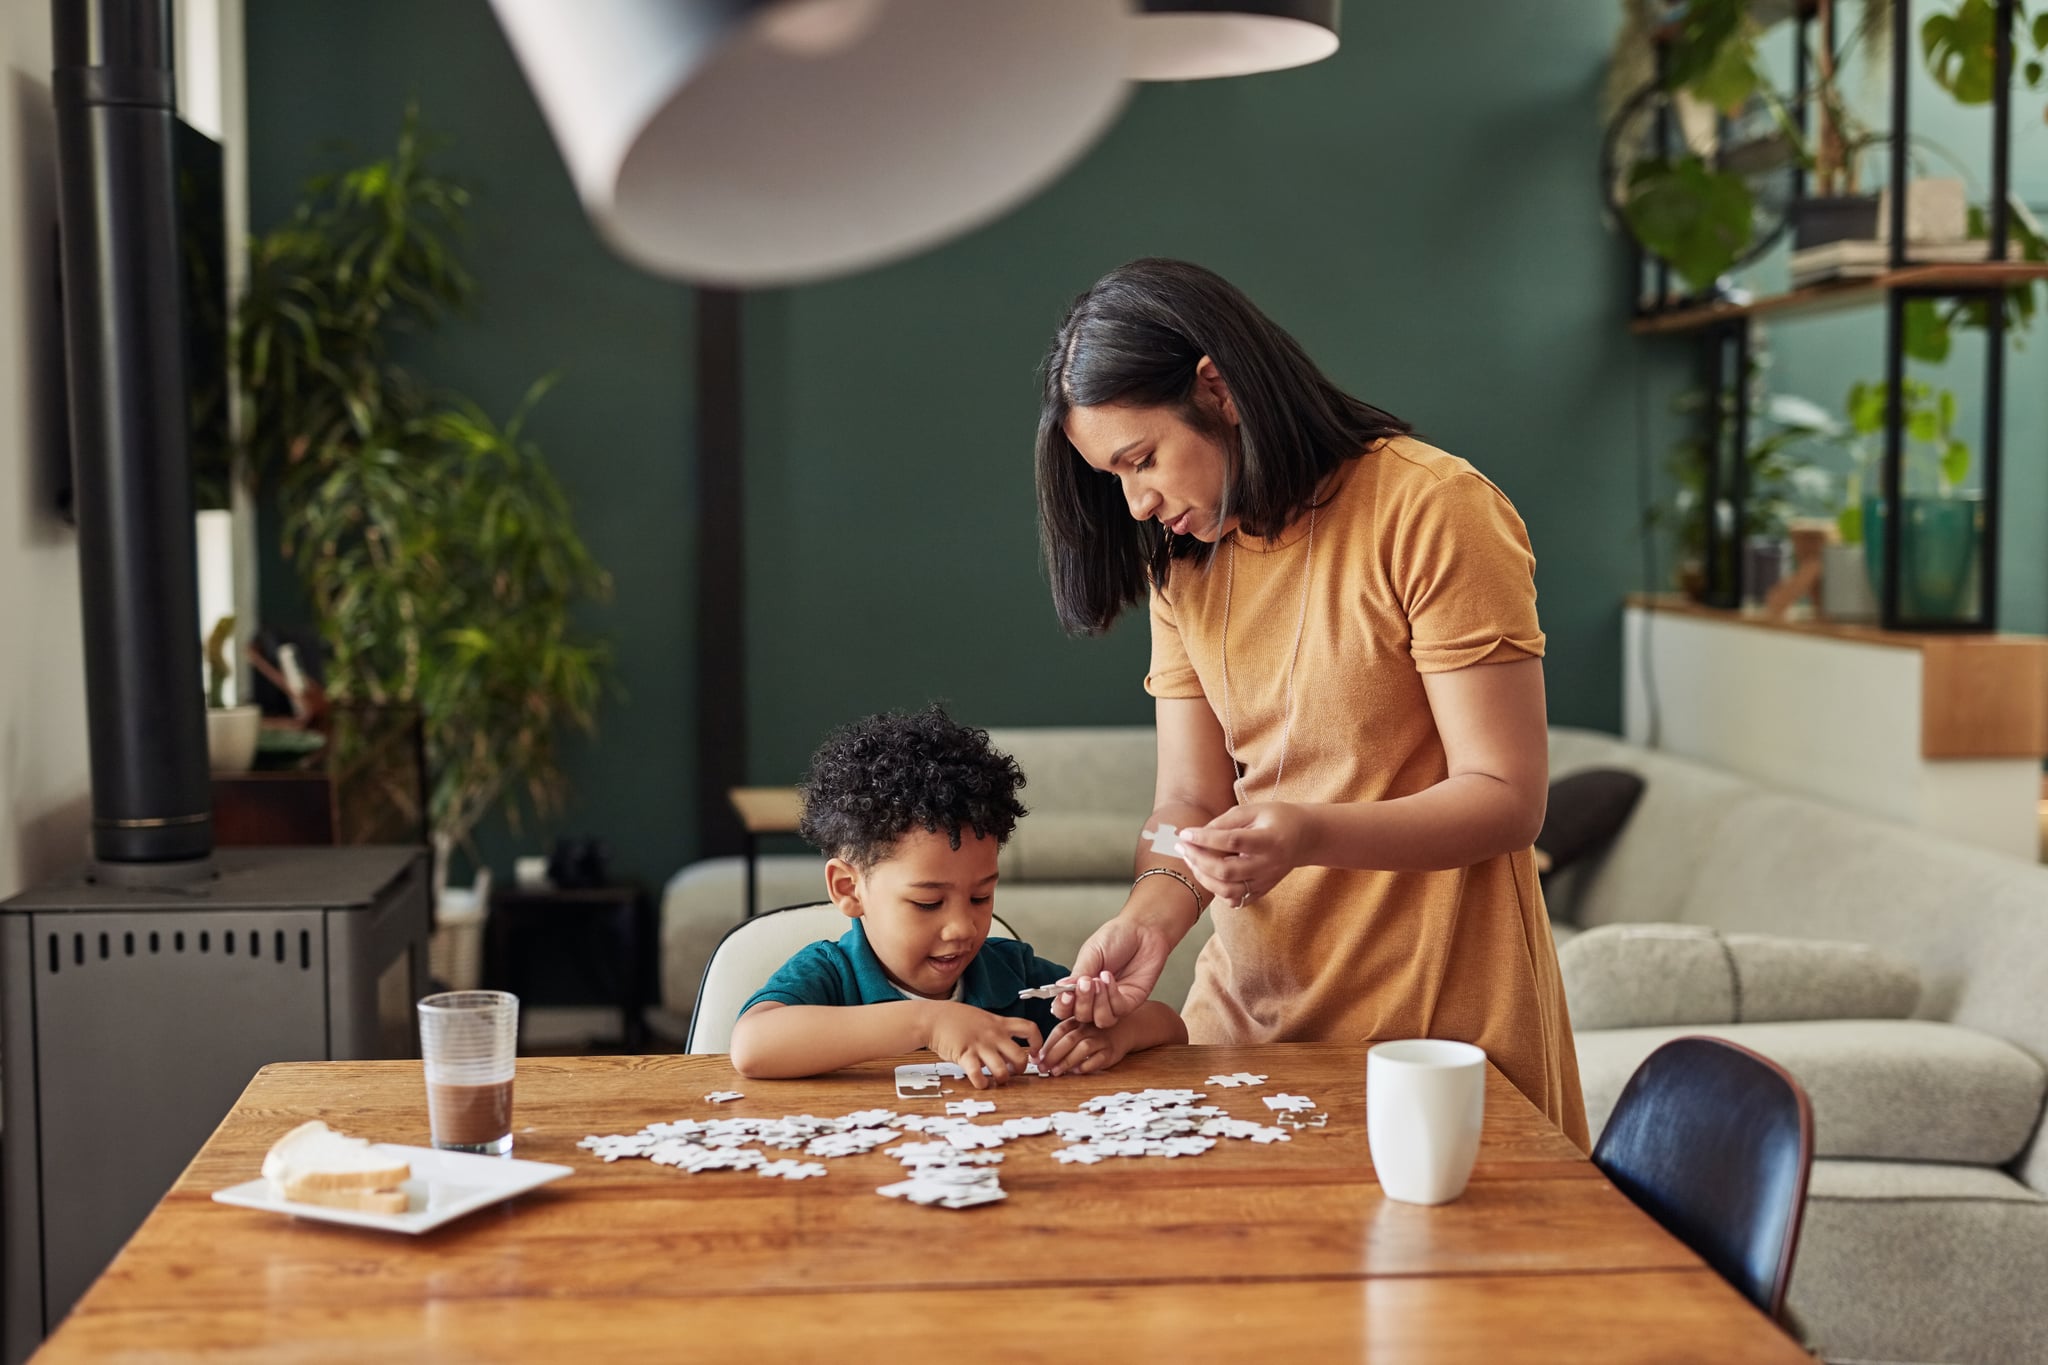 <p>Even young infants and toddlers can partake in this activity using large or peg puzzles. Older children can help put together intricate jigsaw puzzles. This indoor idea is well-suited for independent play, but families can divide and conquer larger puzzles together for a bonding experience.</p>